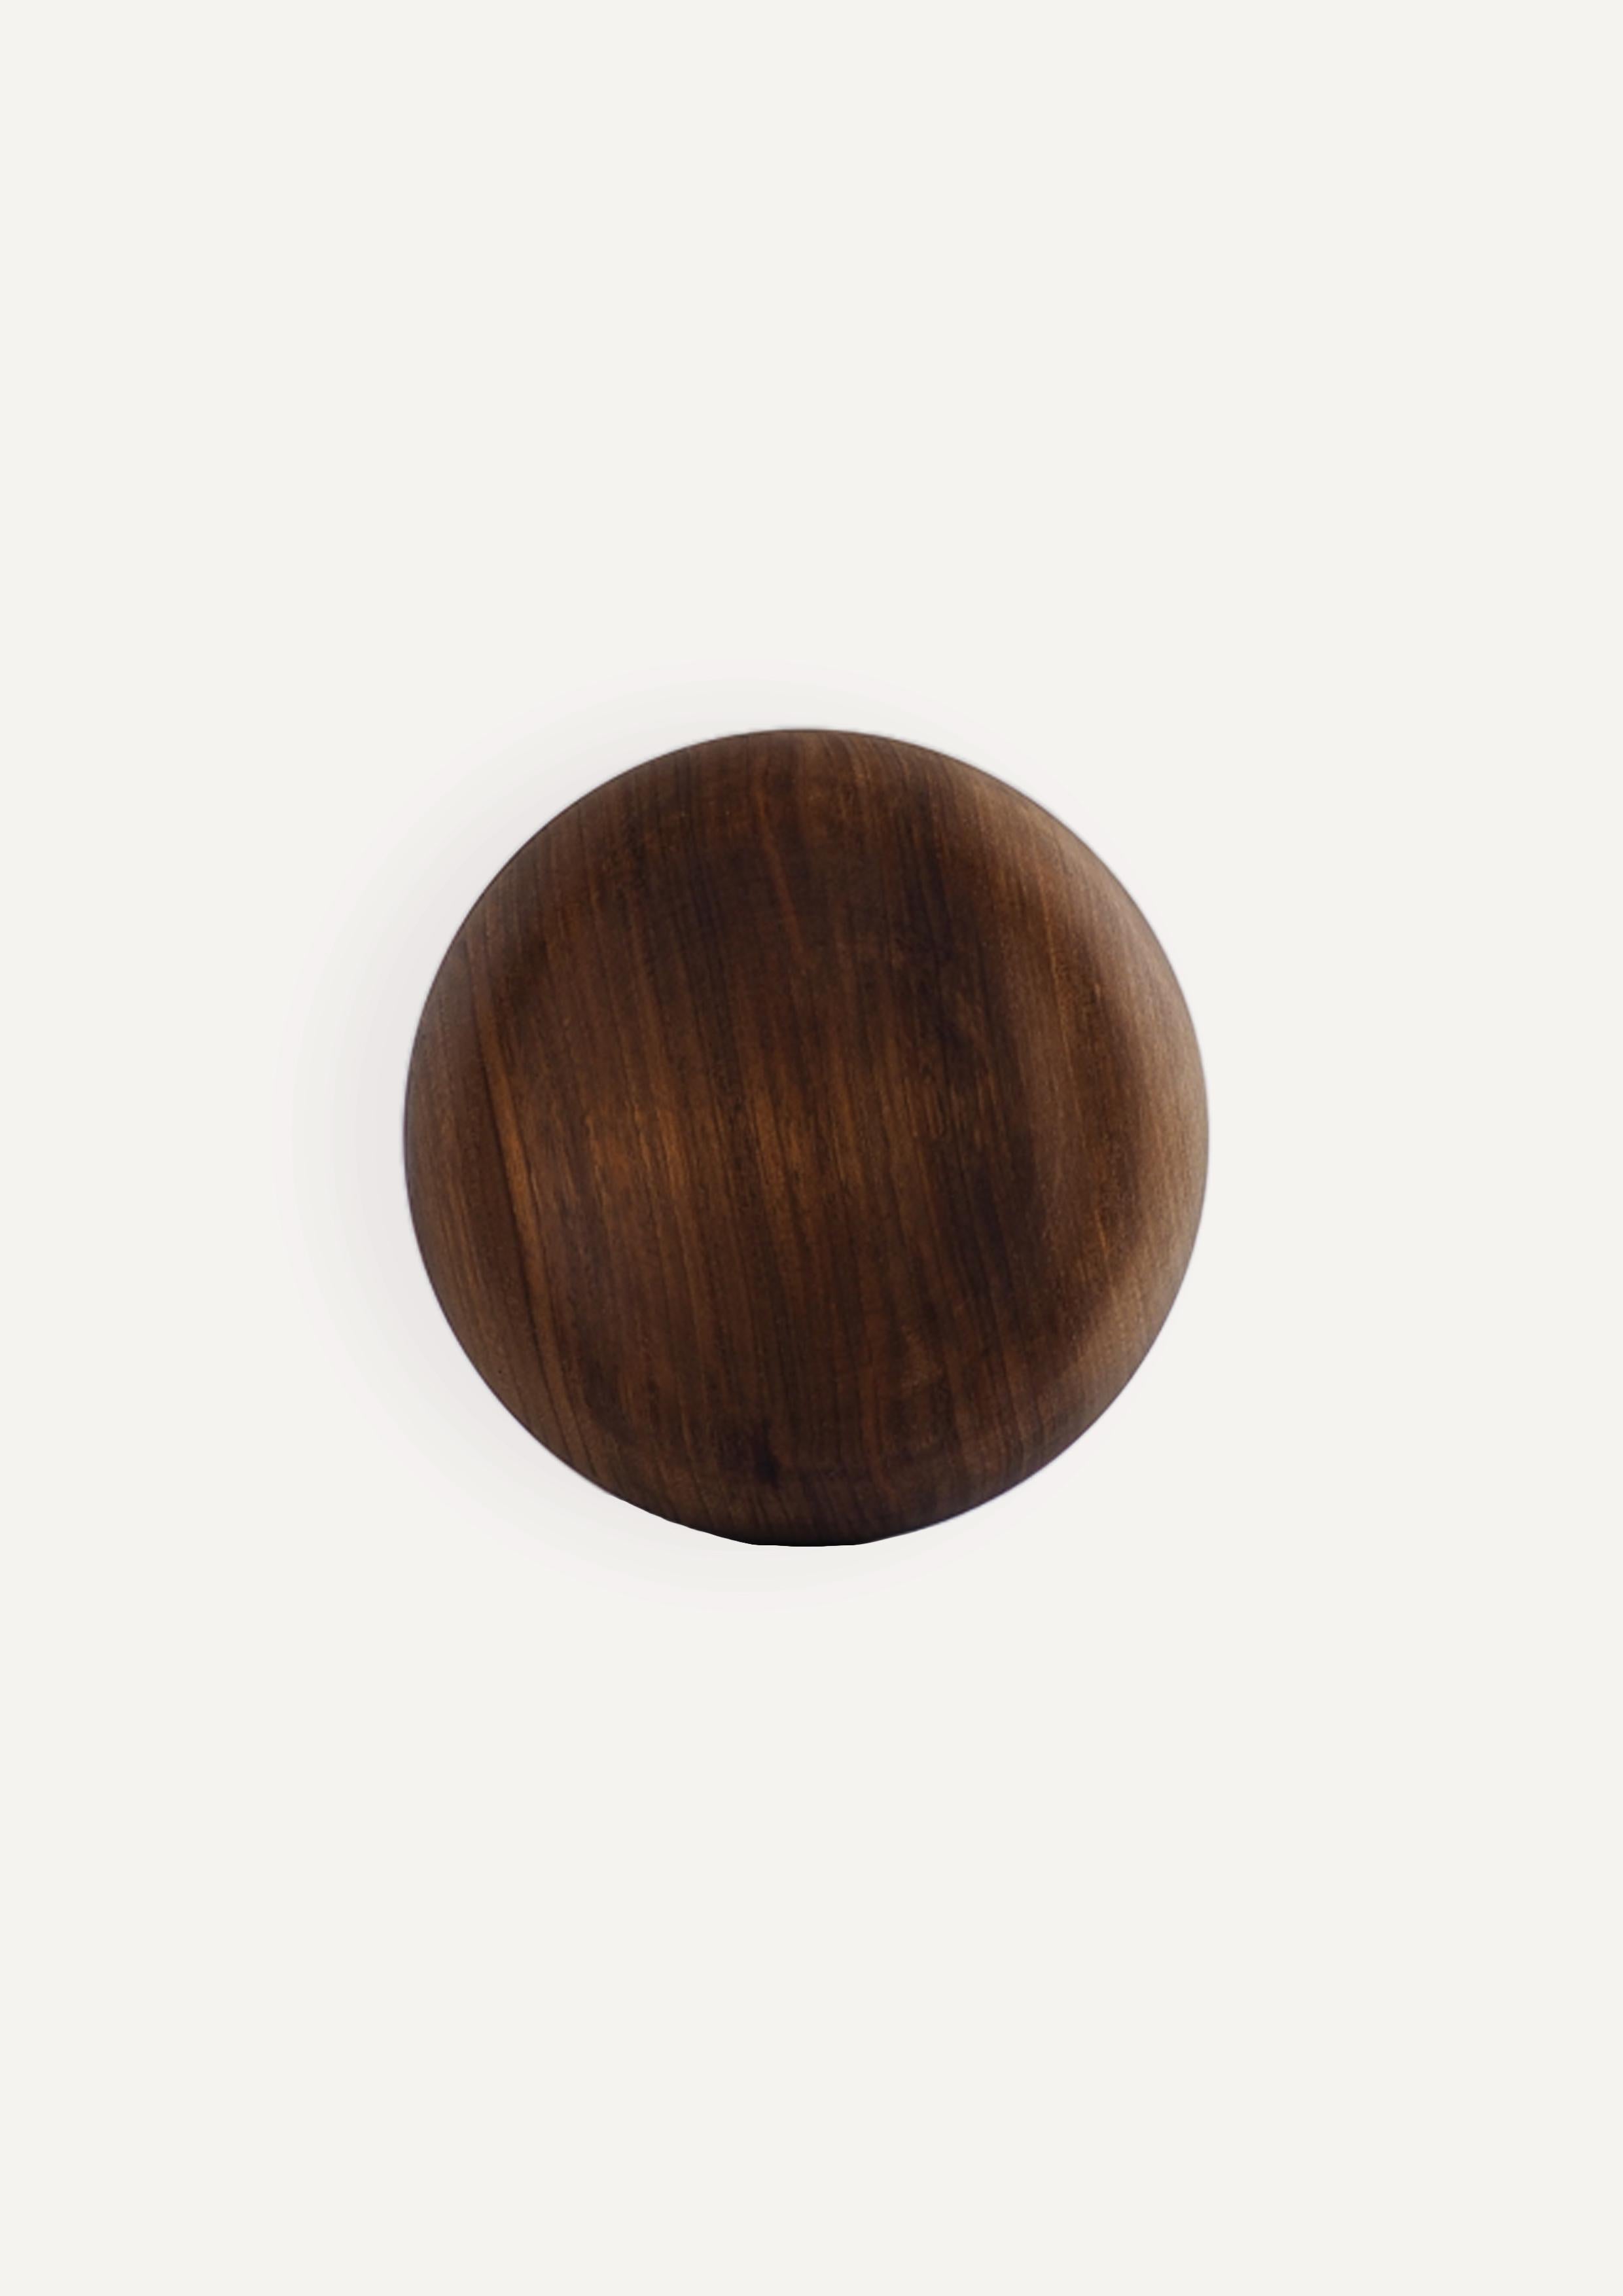 Walnut Large bowl, walnut wood, woodturning, handmade in France, OROS Editions  For Sale